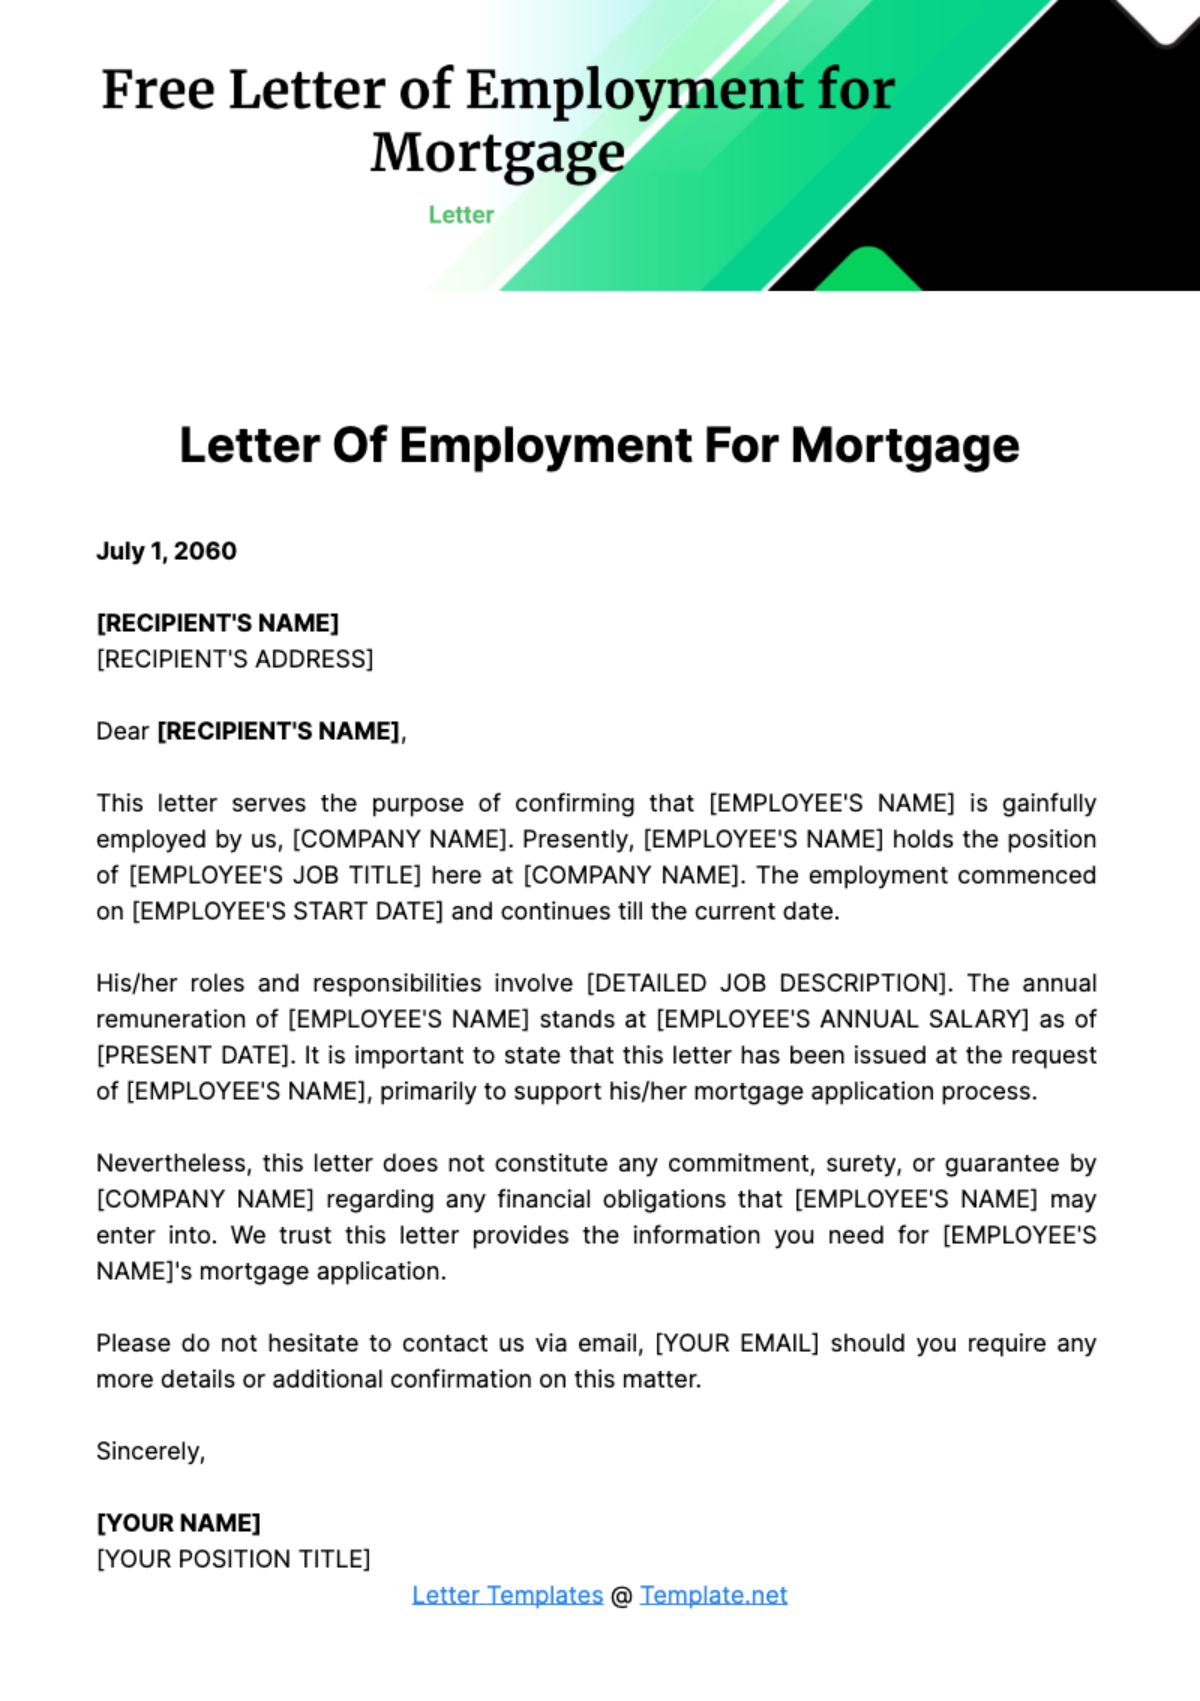 Free Letter of Employment for Mortgage Template